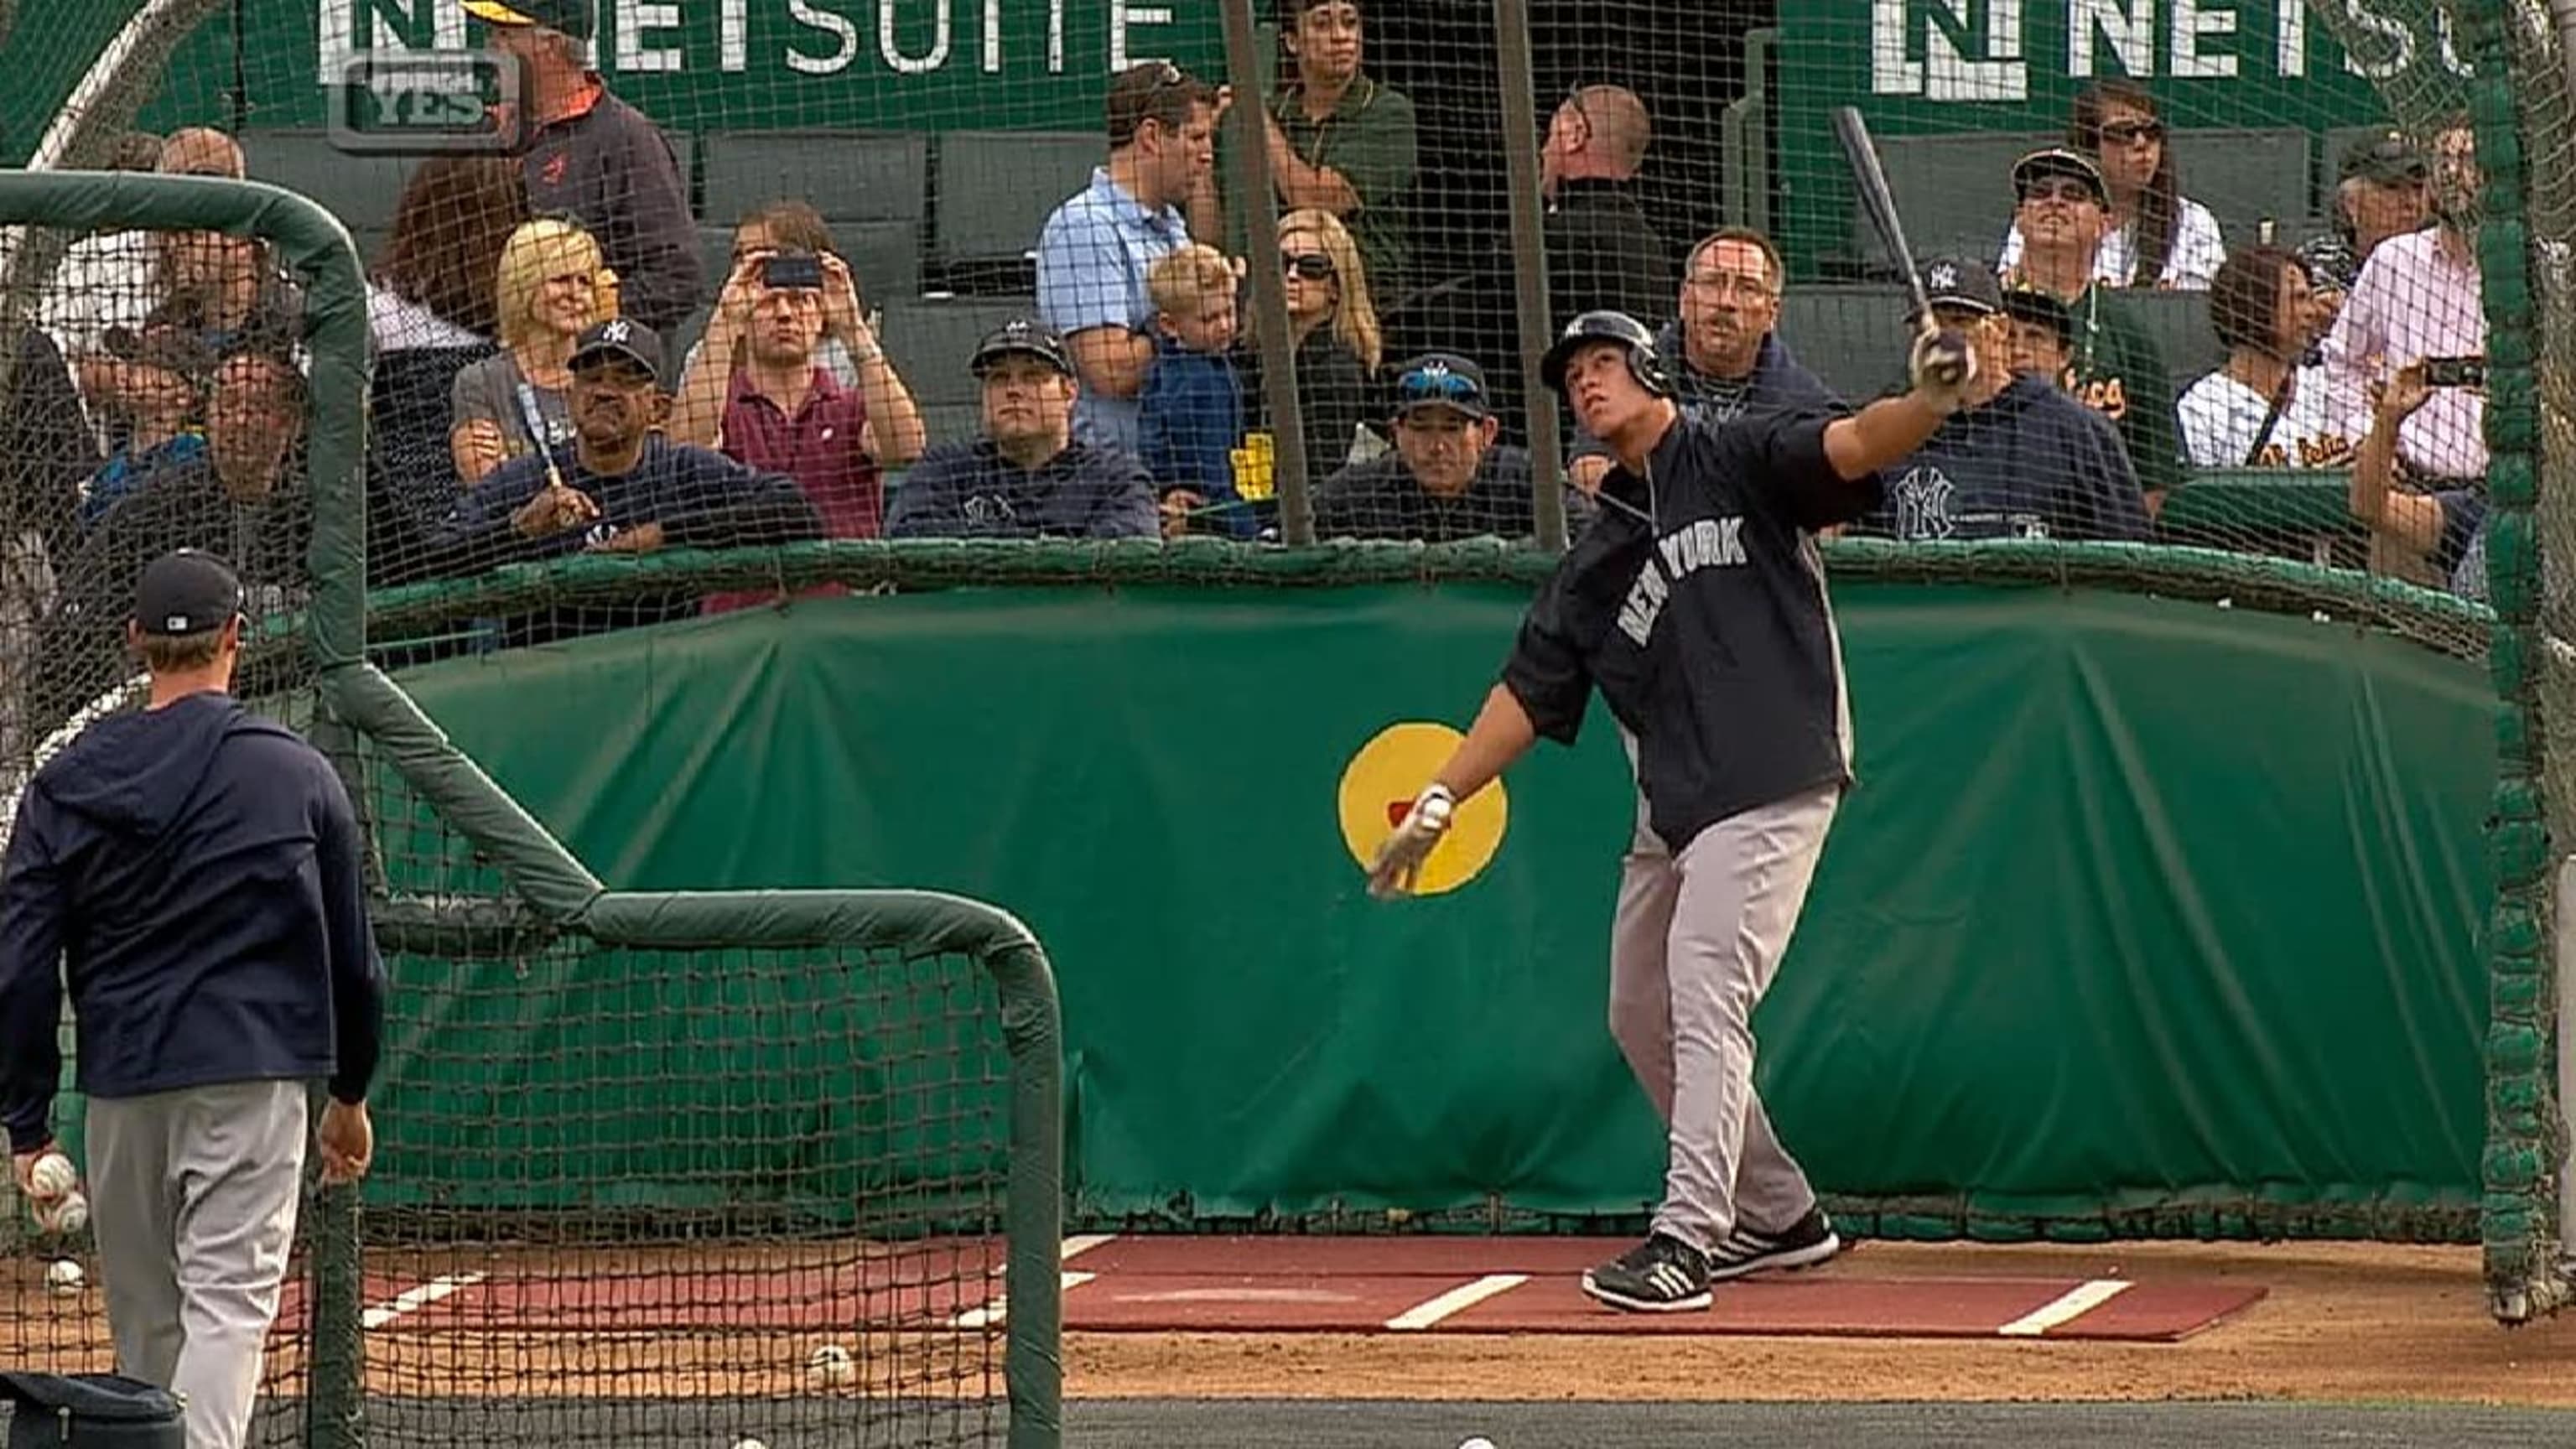 Nick Swisher's back representing the Yankees on MLB's Home Run Derby X